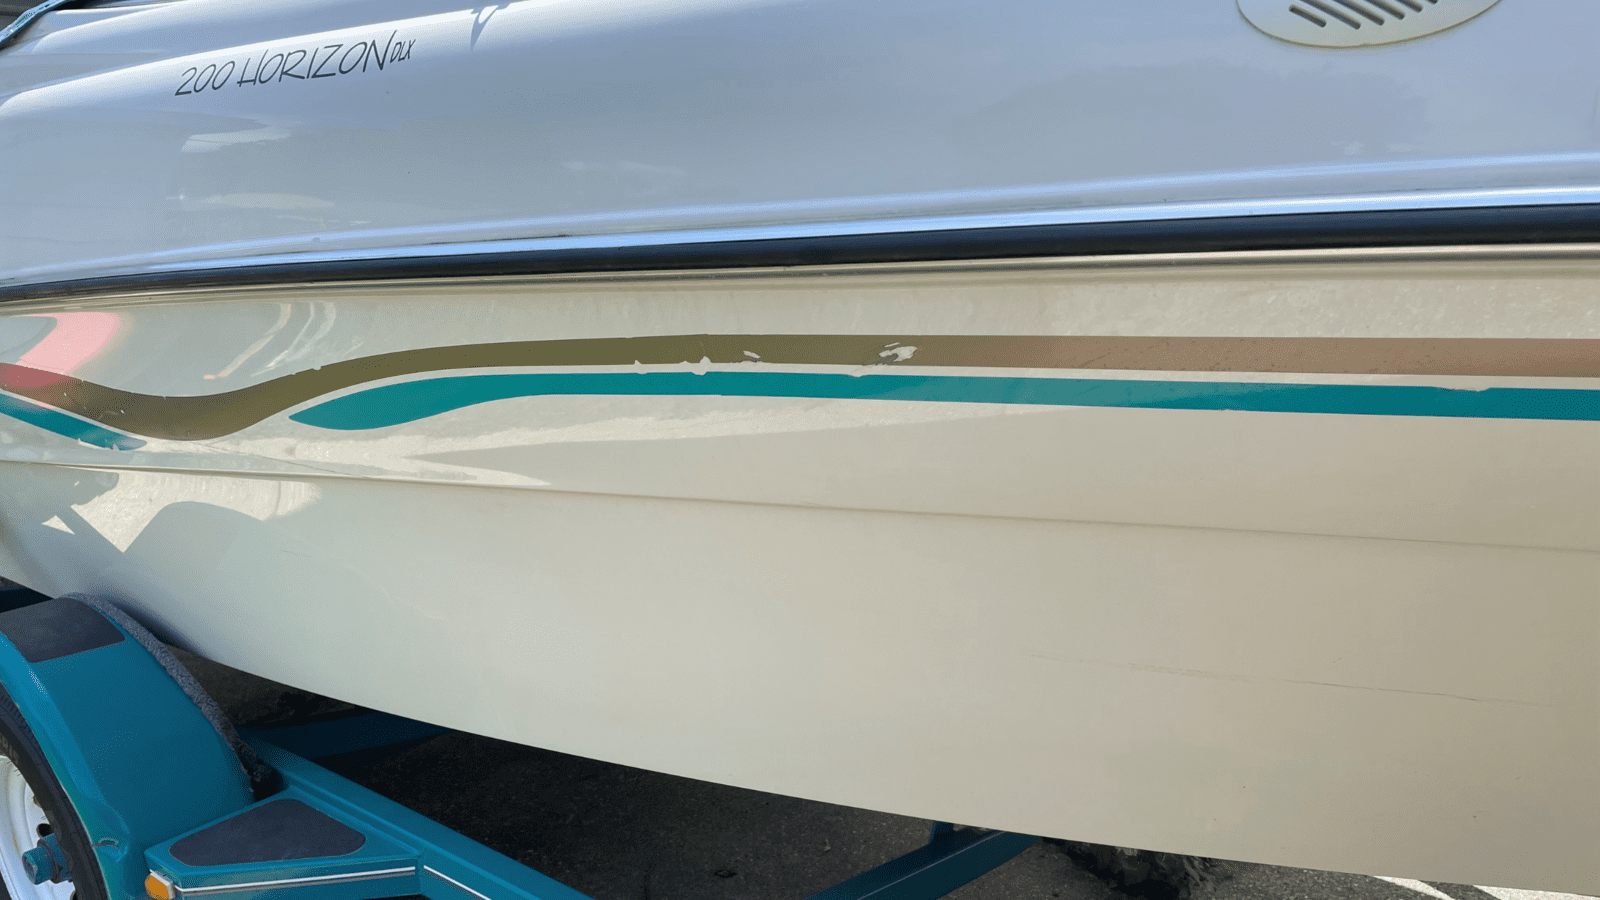 How to remove boat decals